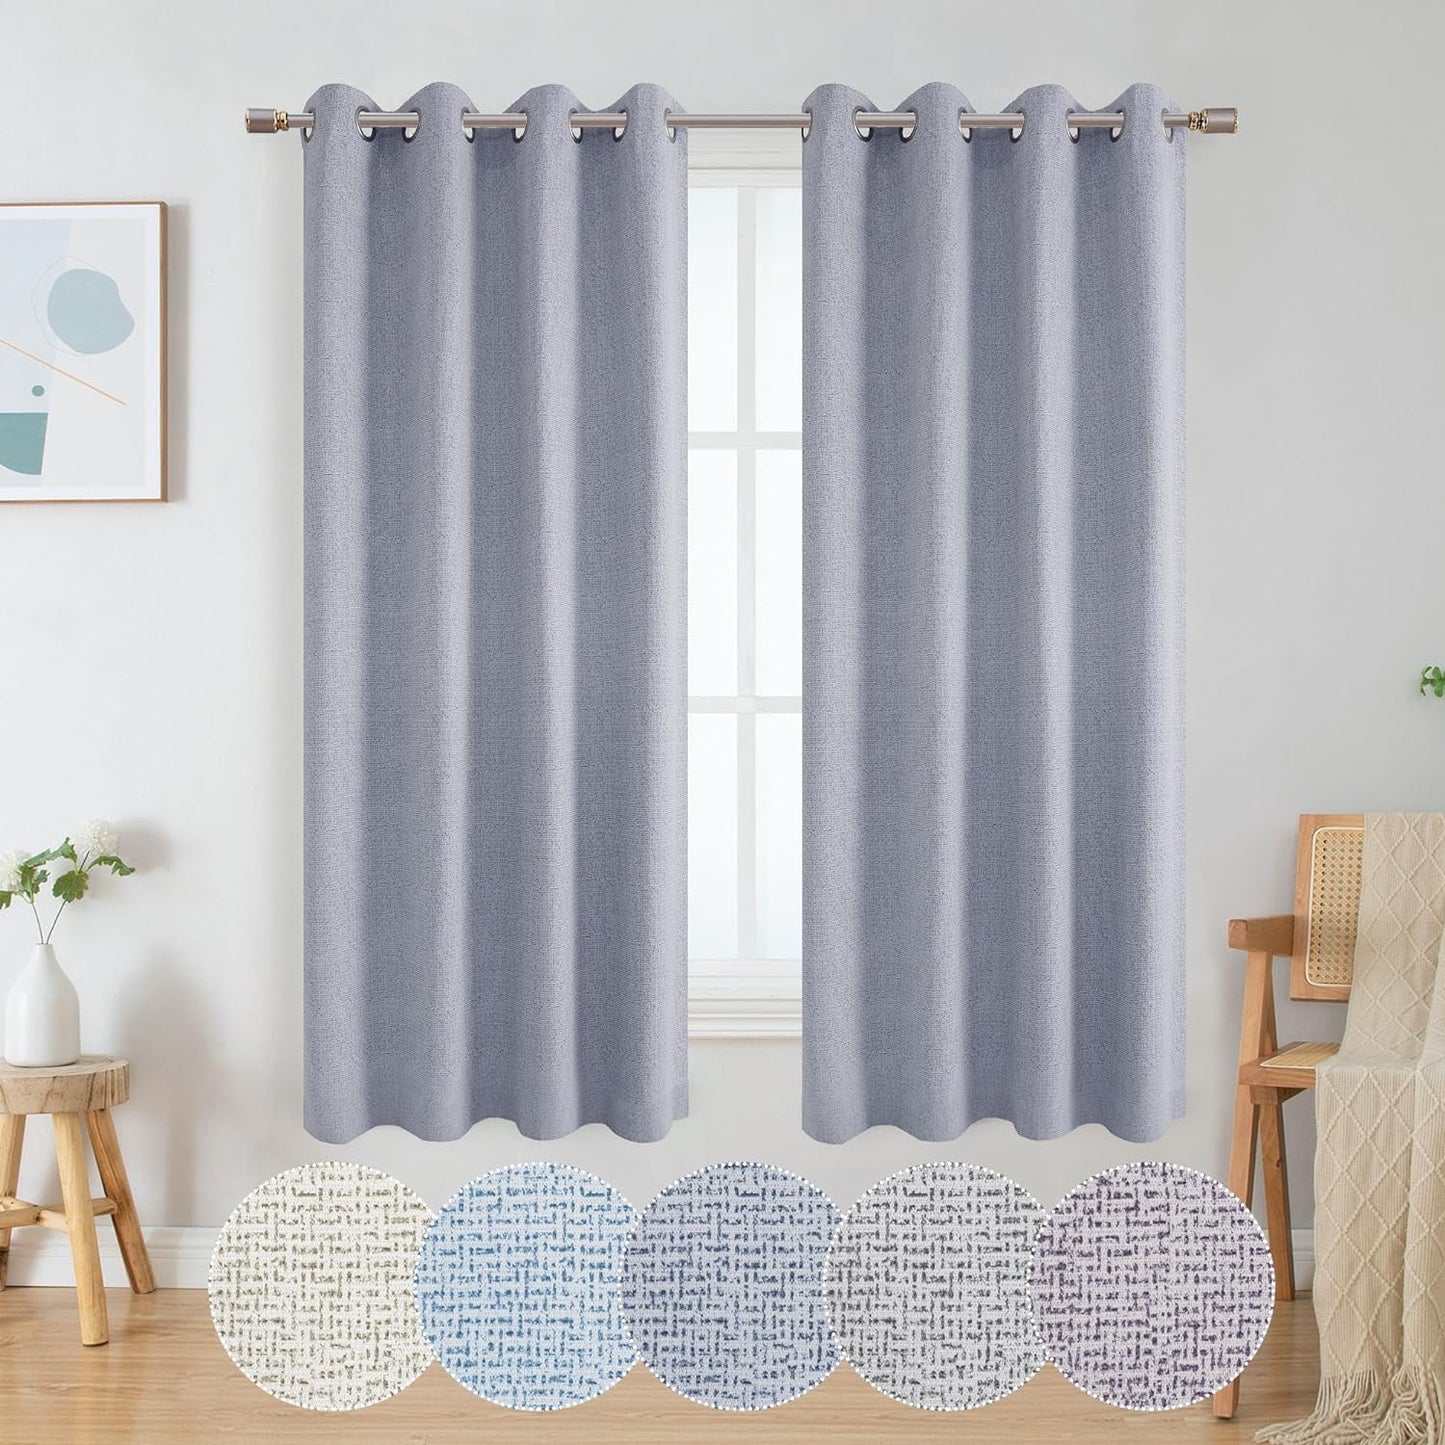 OWENIE Luke Black Out Curtains 63 Inch Long 2 Panels for Bedroom, Geometric Printed Completely Blackout Room Darkening Curtains, Grommet Thermal Insulated Living Room Curtain, 2 PCS, Each 42Wx63L Inch  OWENIE Dark Blue 42"W X 63"L | 2 Pcs 